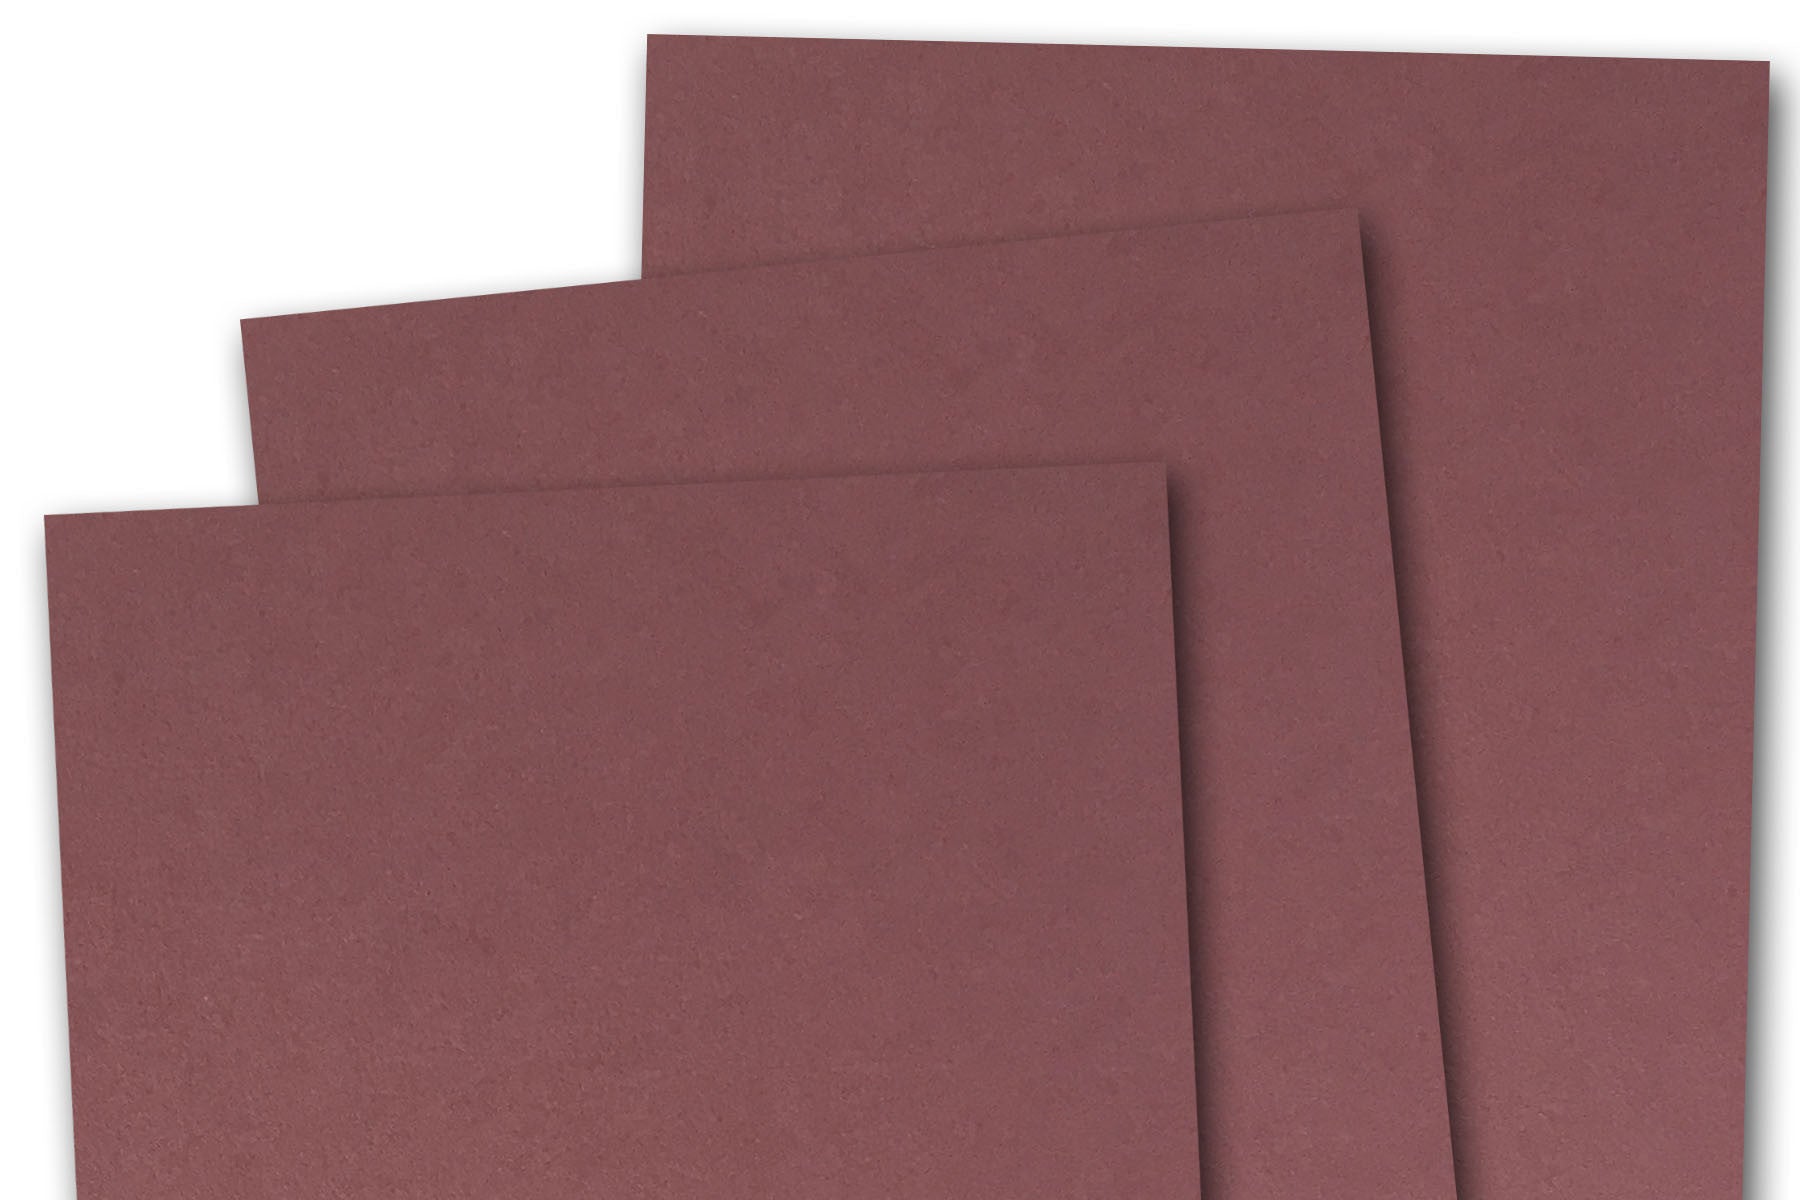 Maroon Card Stock - 12 x 12 in 80 lb Cover Smooth